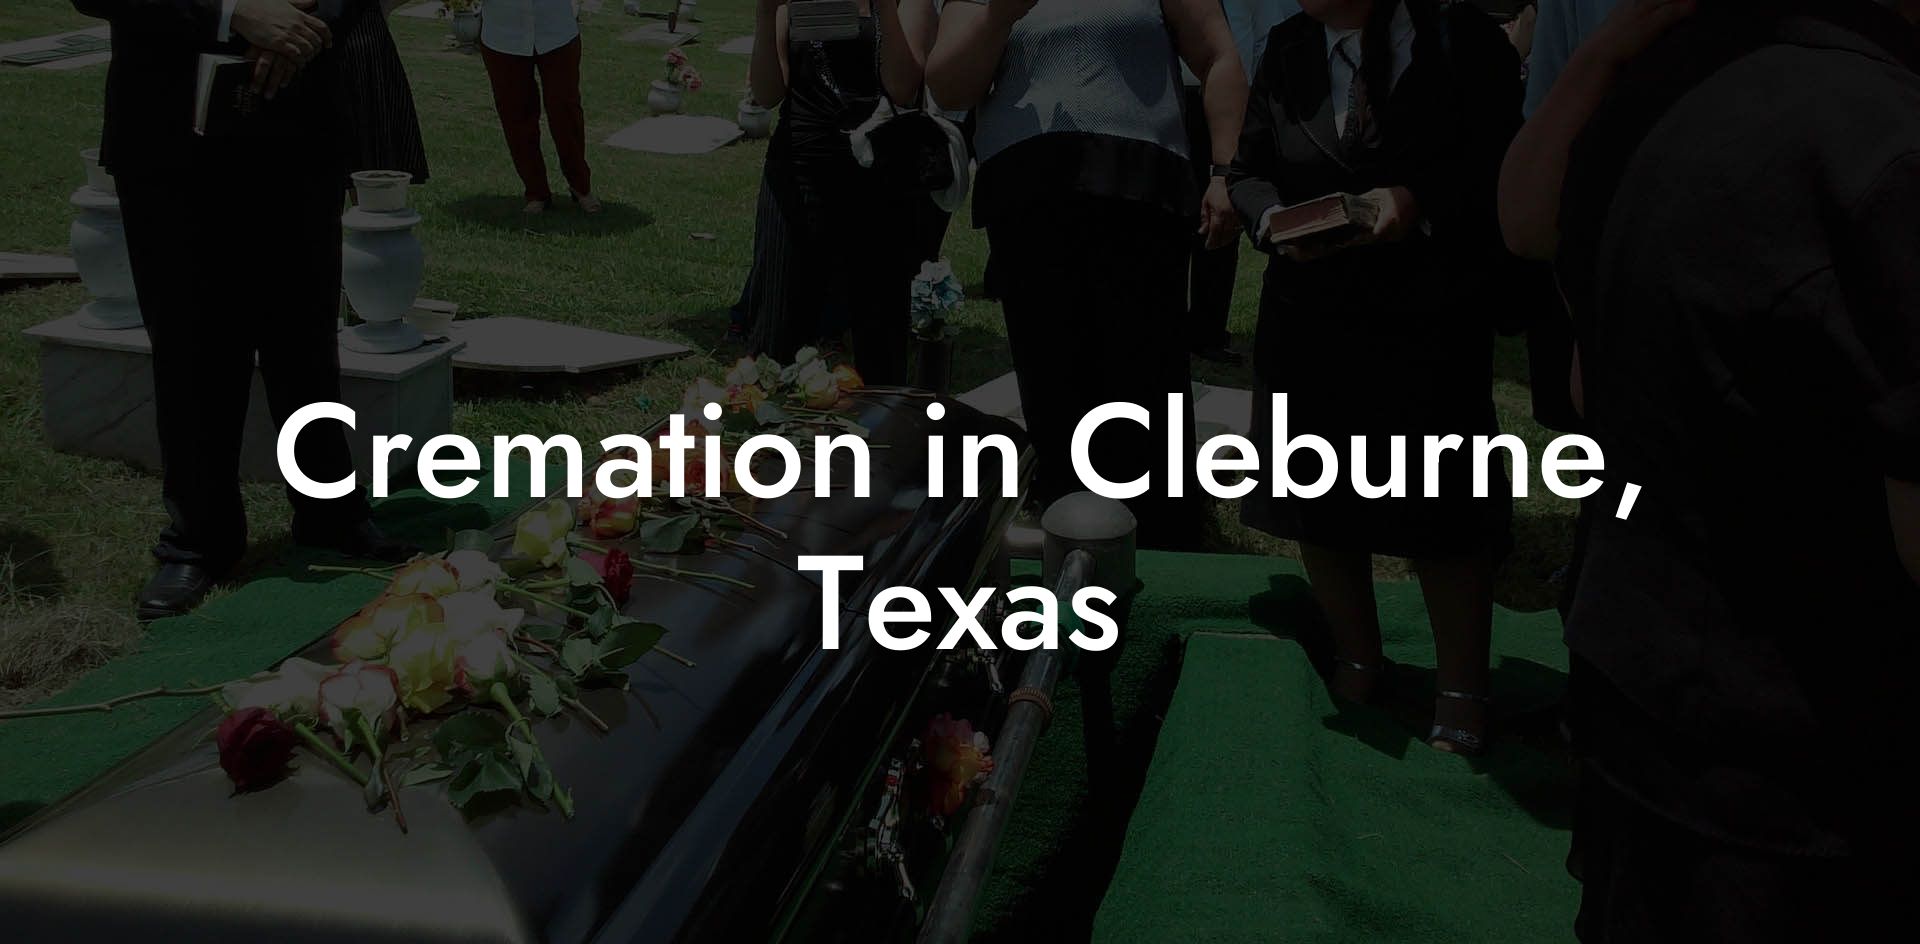 Cremation in Cleburne, Texas